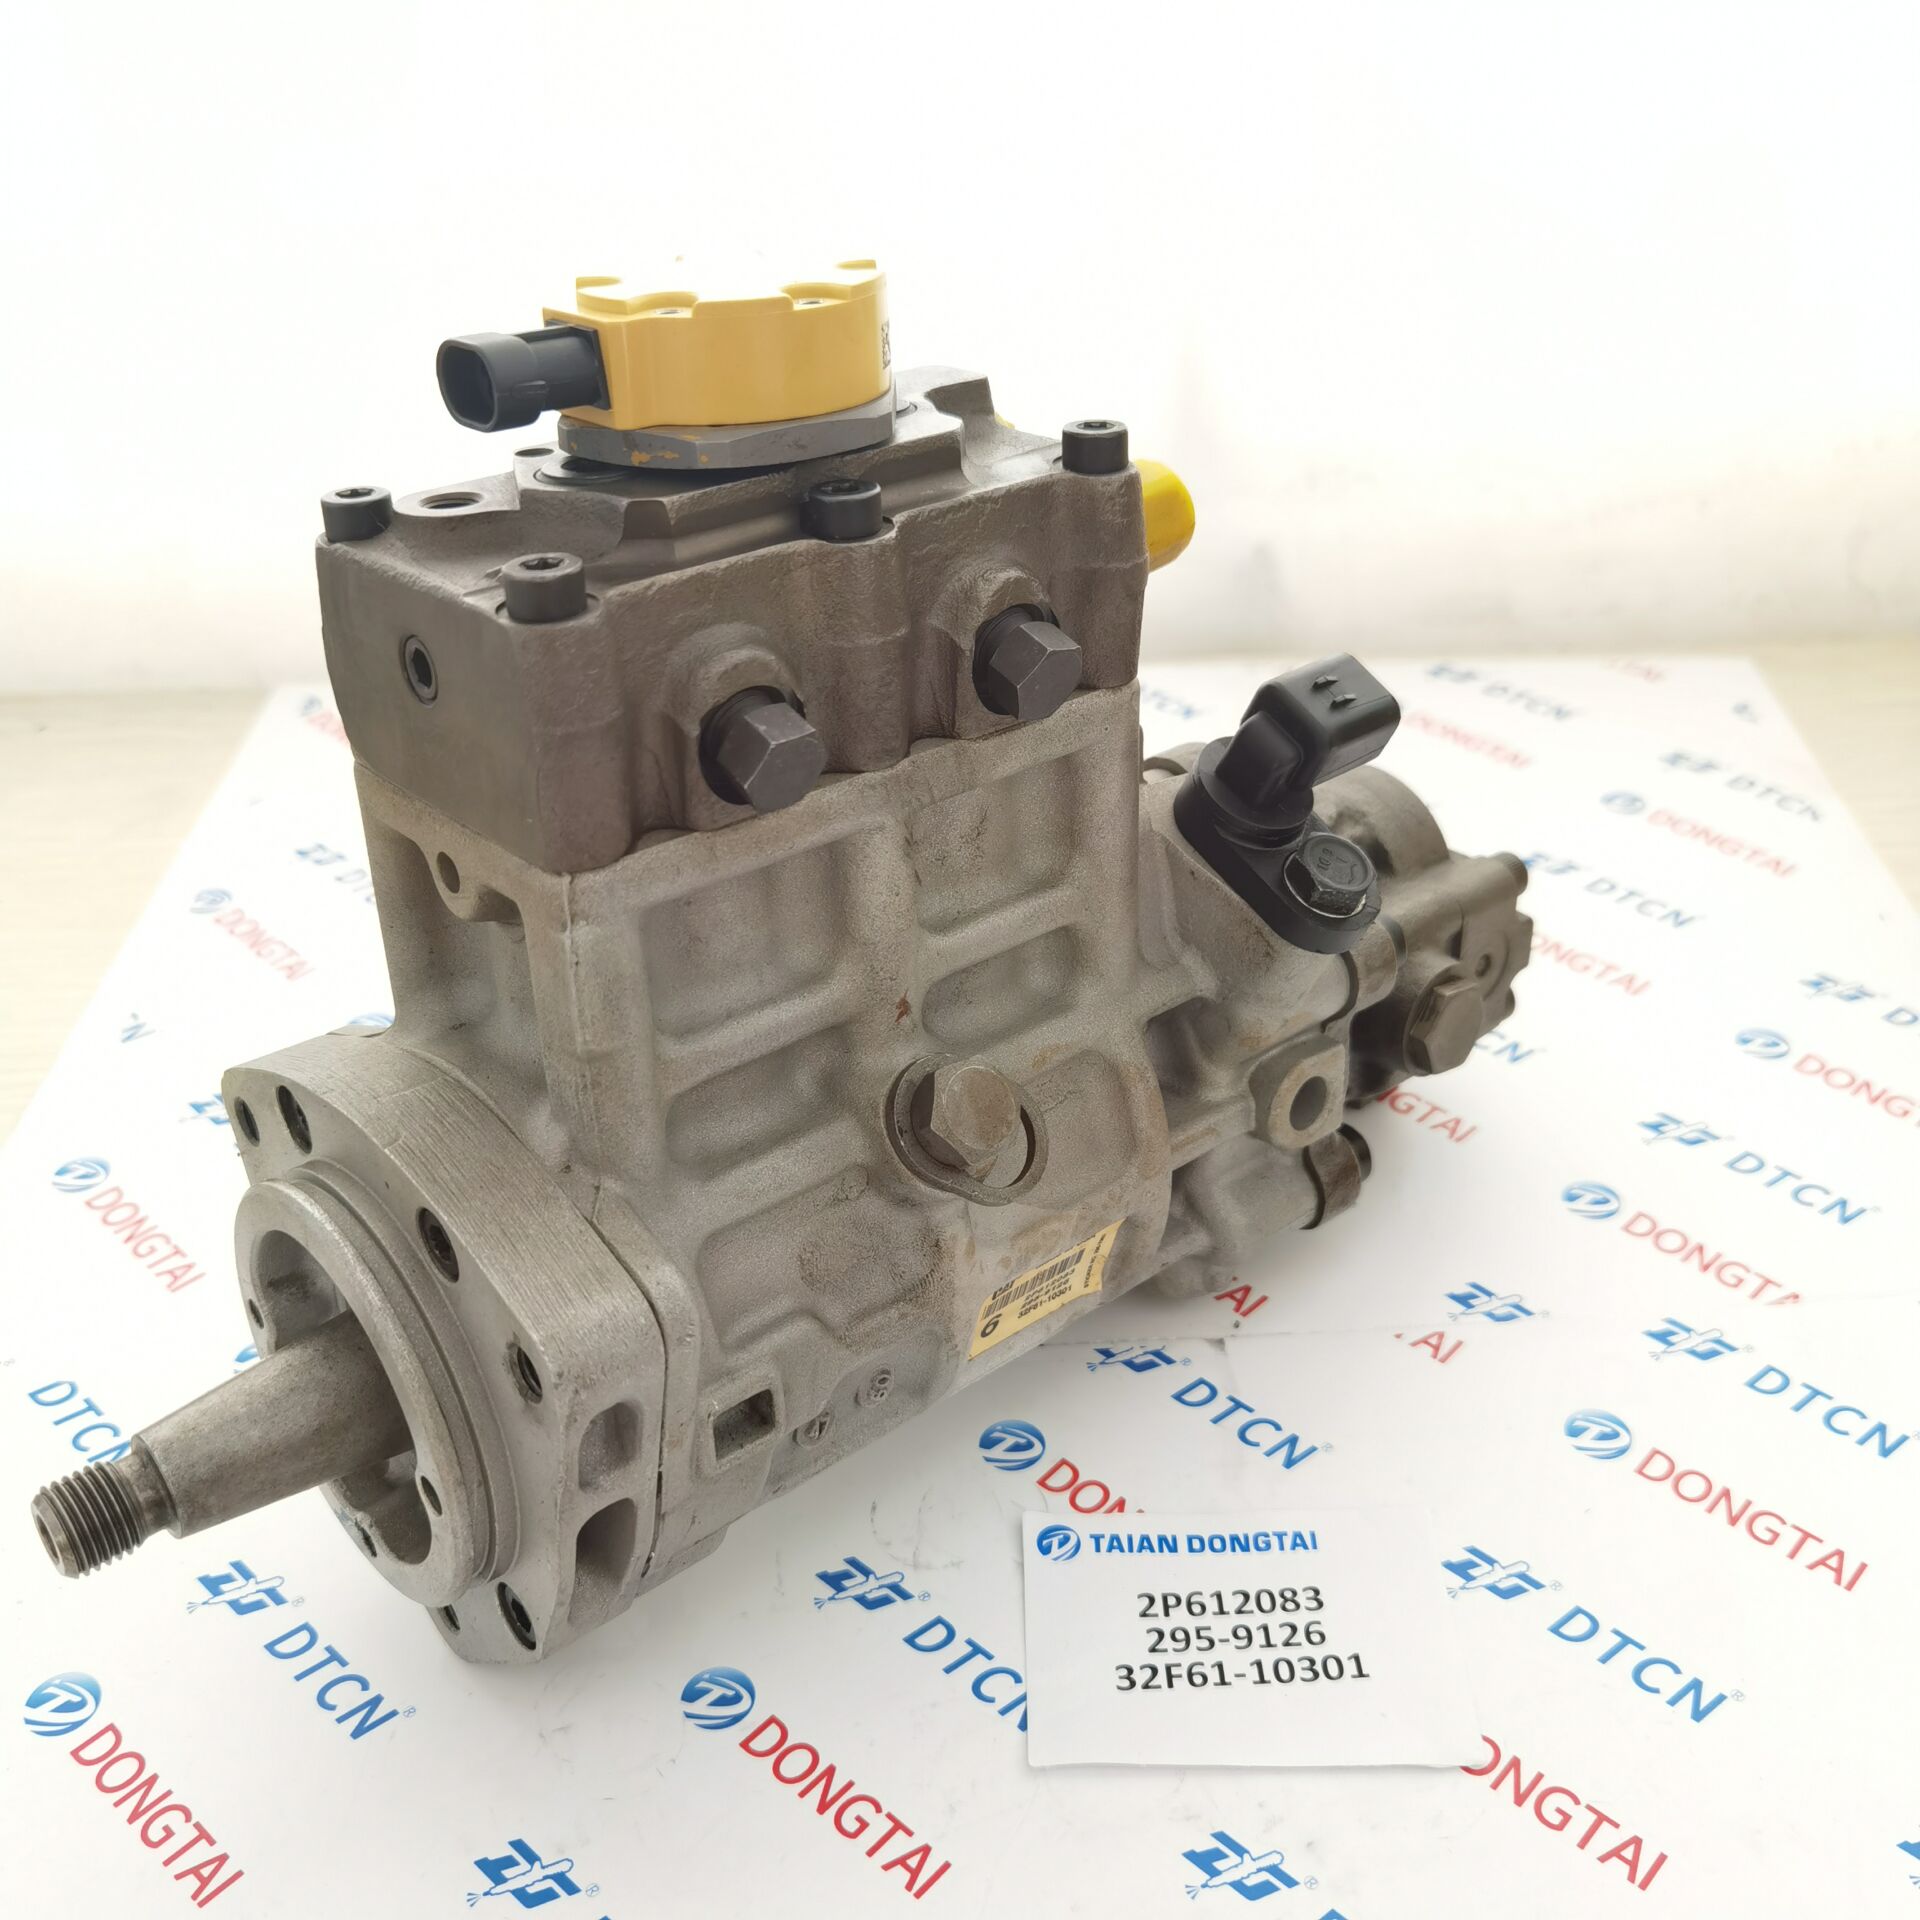 OEM/ODM China Electrical Test Bench - Caterpillar 320D Fuel Injection pump 295-9126 2P612083 32F61-10301 For Cat Excavator    – Dongtai